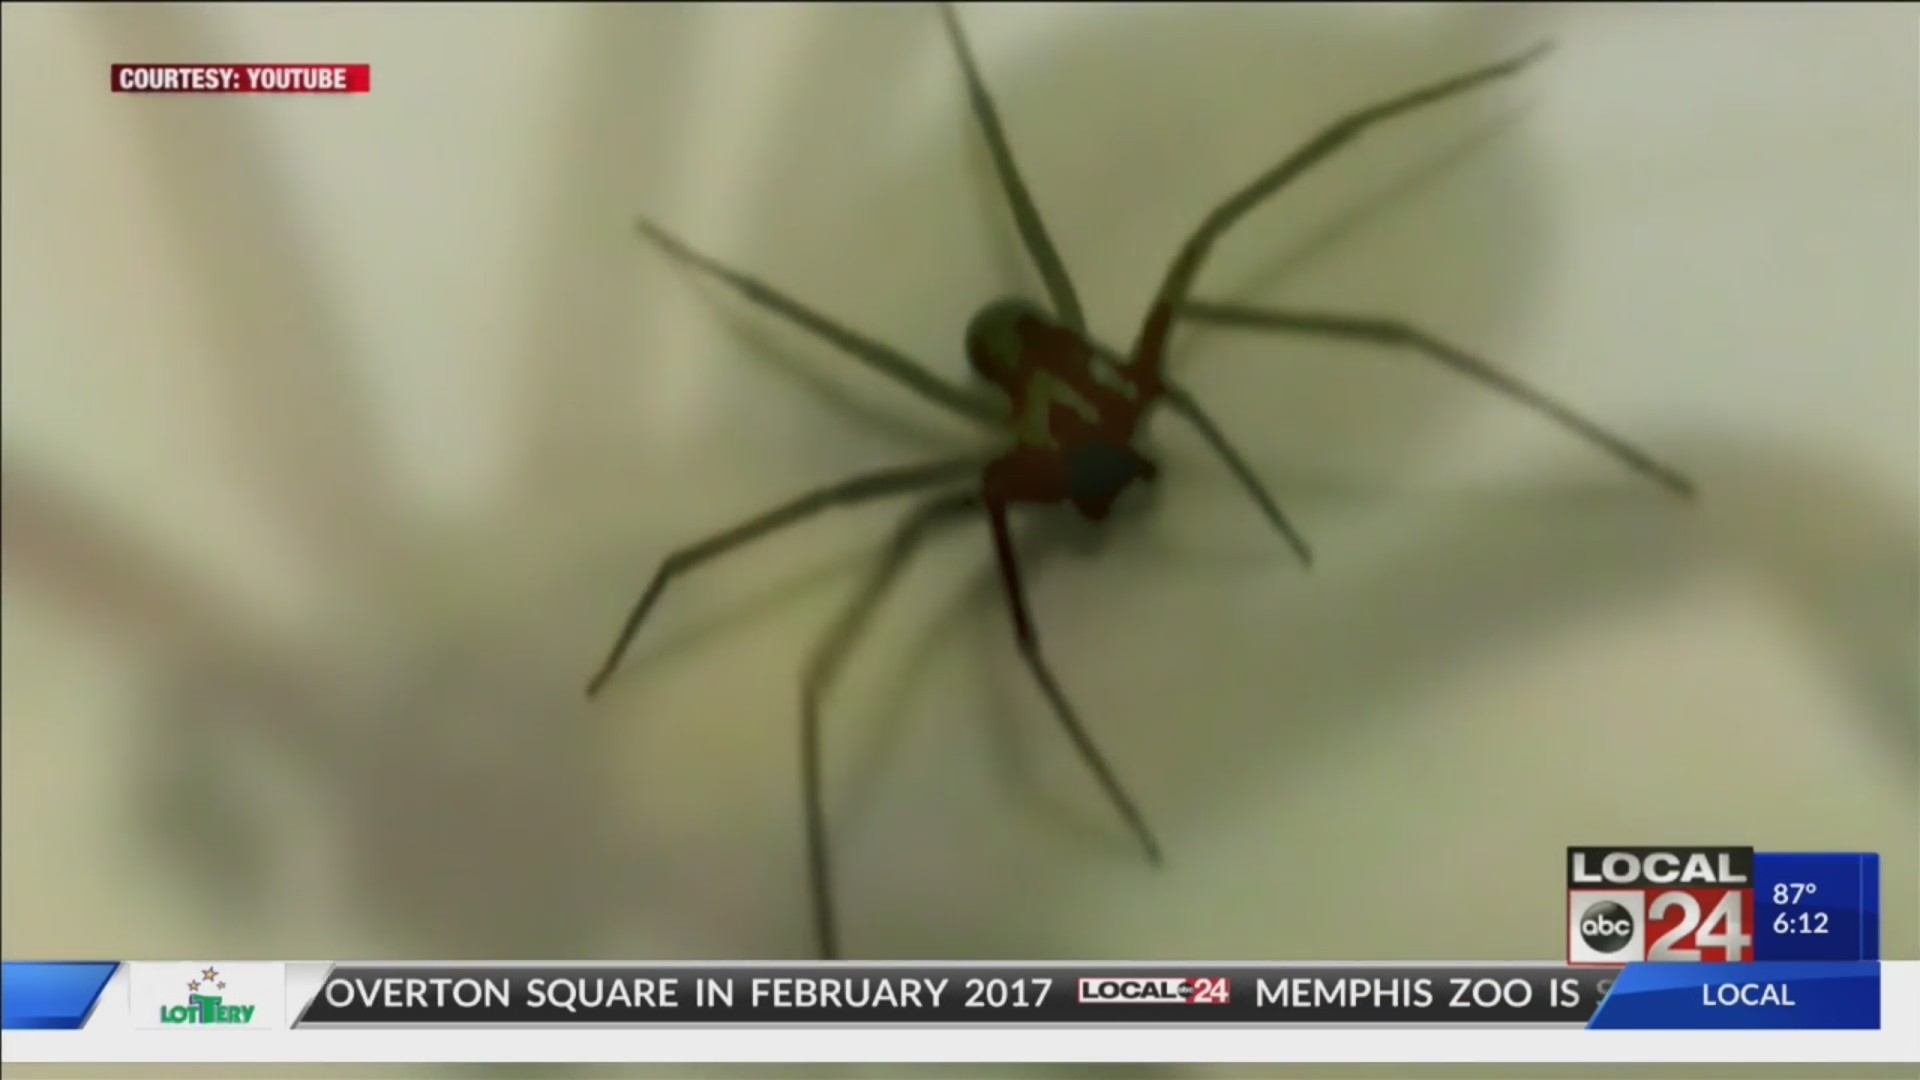 It's brown recluse spider season: Warning from Mid-South teen who took months to recover from bite